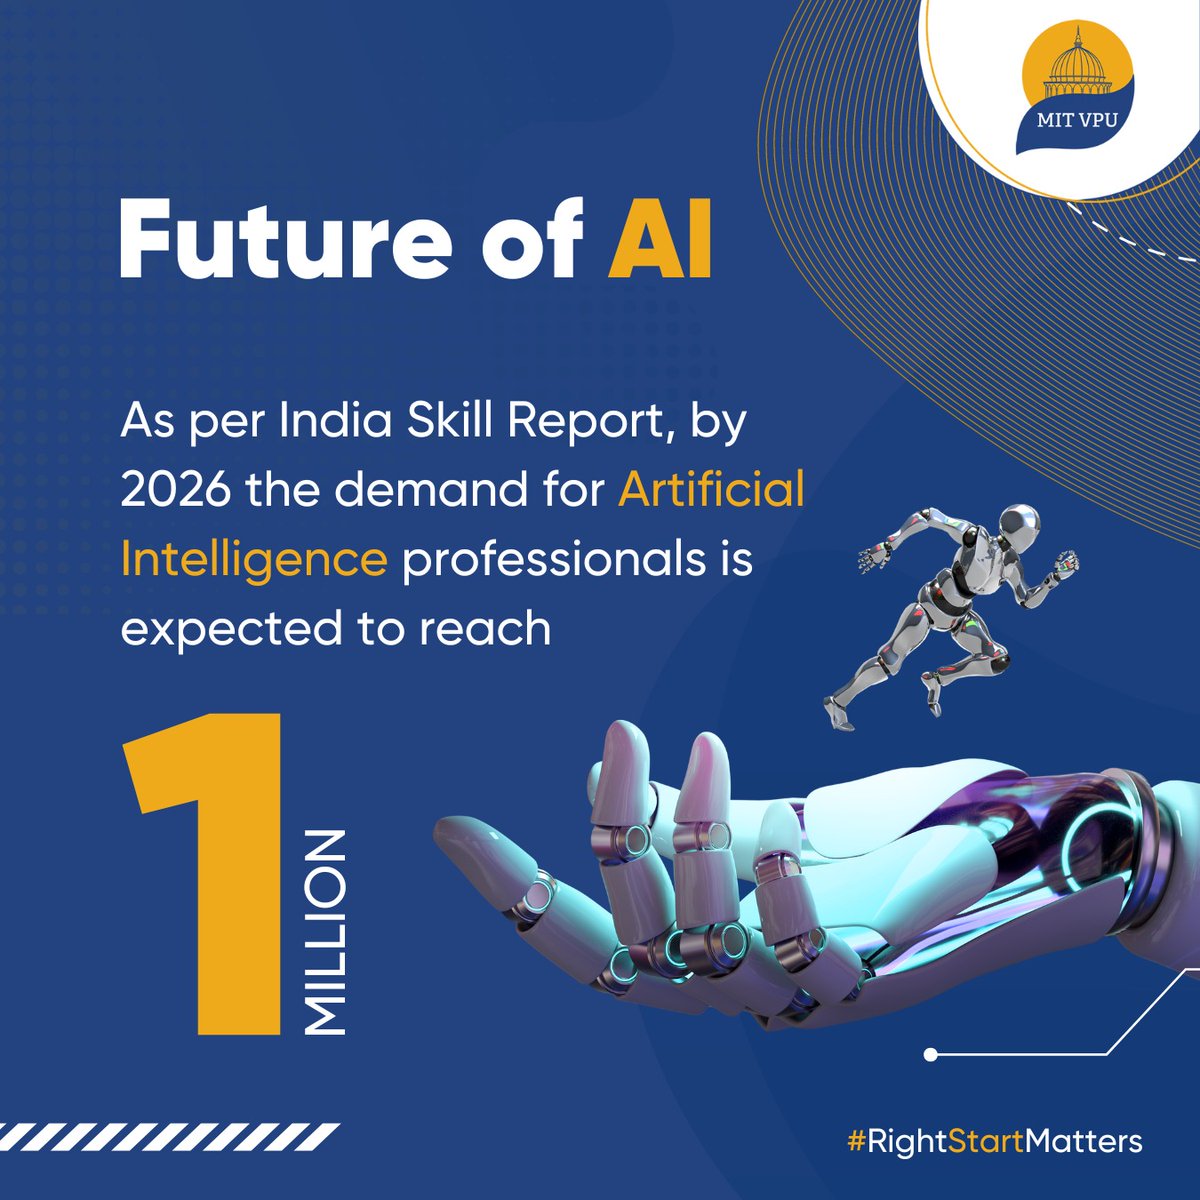 The Indian #ITsector is on the verge of an AI explosion. A recent report by AICTE & Wheebox predicts a demand for 1 million #AIprofessionals by 2026. This presents a golden opportunity for those seeking future-proof careers.

India is uniquely positioned to lead this